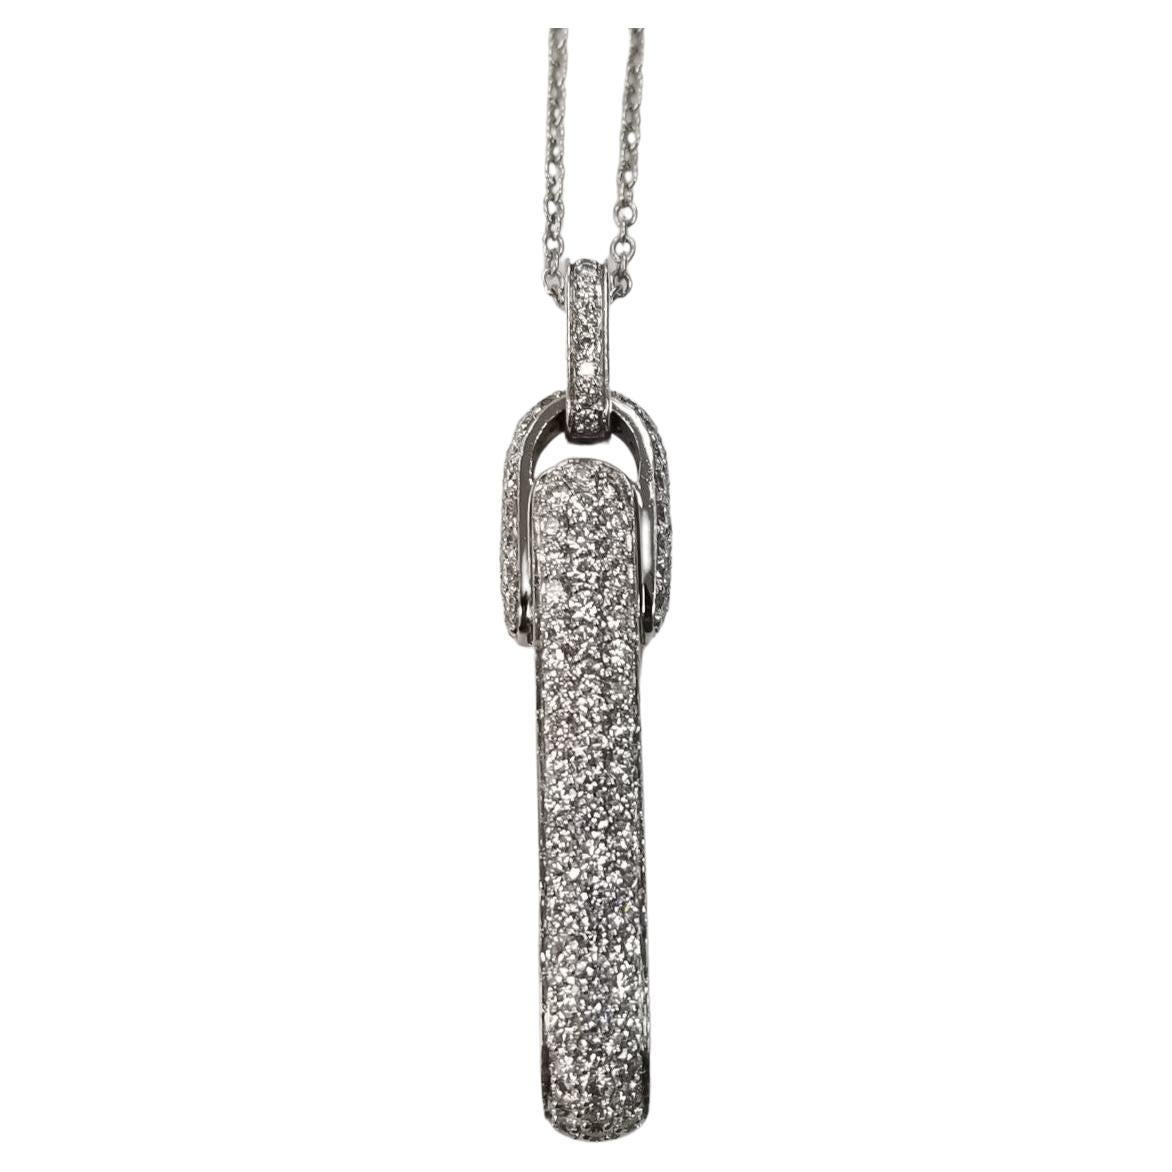 Roberto Coin 18k White Gold Diamond Pave' Bar Pendant and Chain